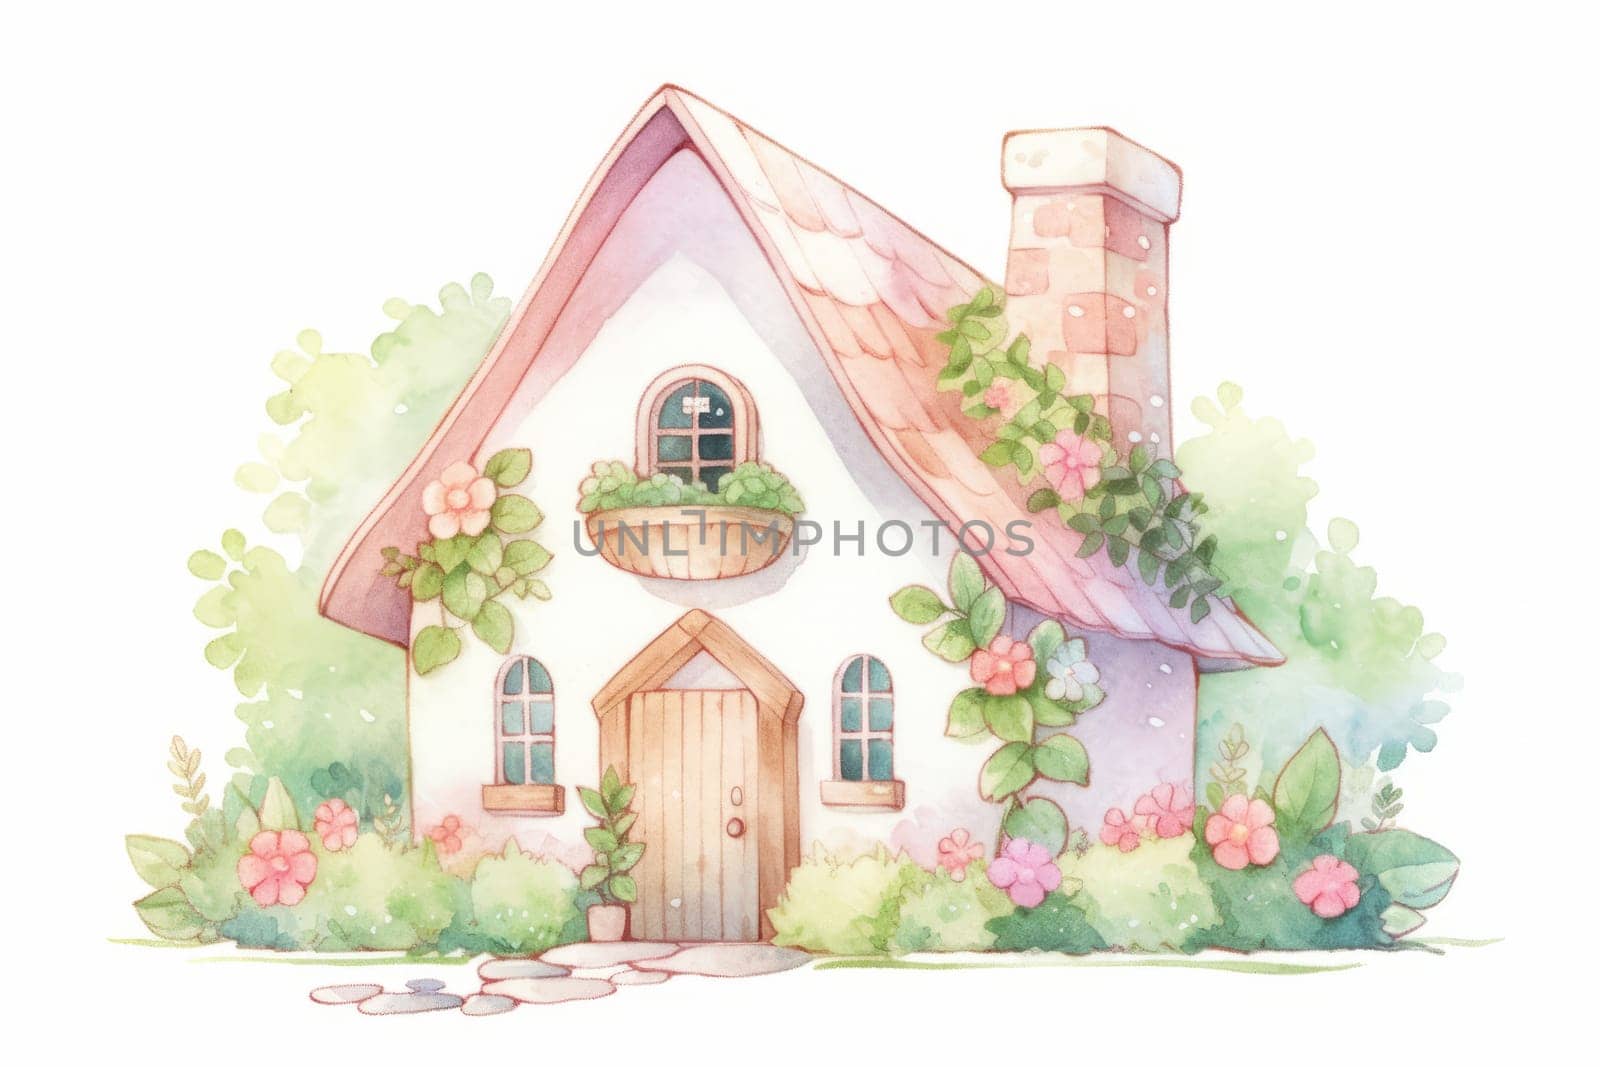 Cute cozy house hand drawn watercolor illustration